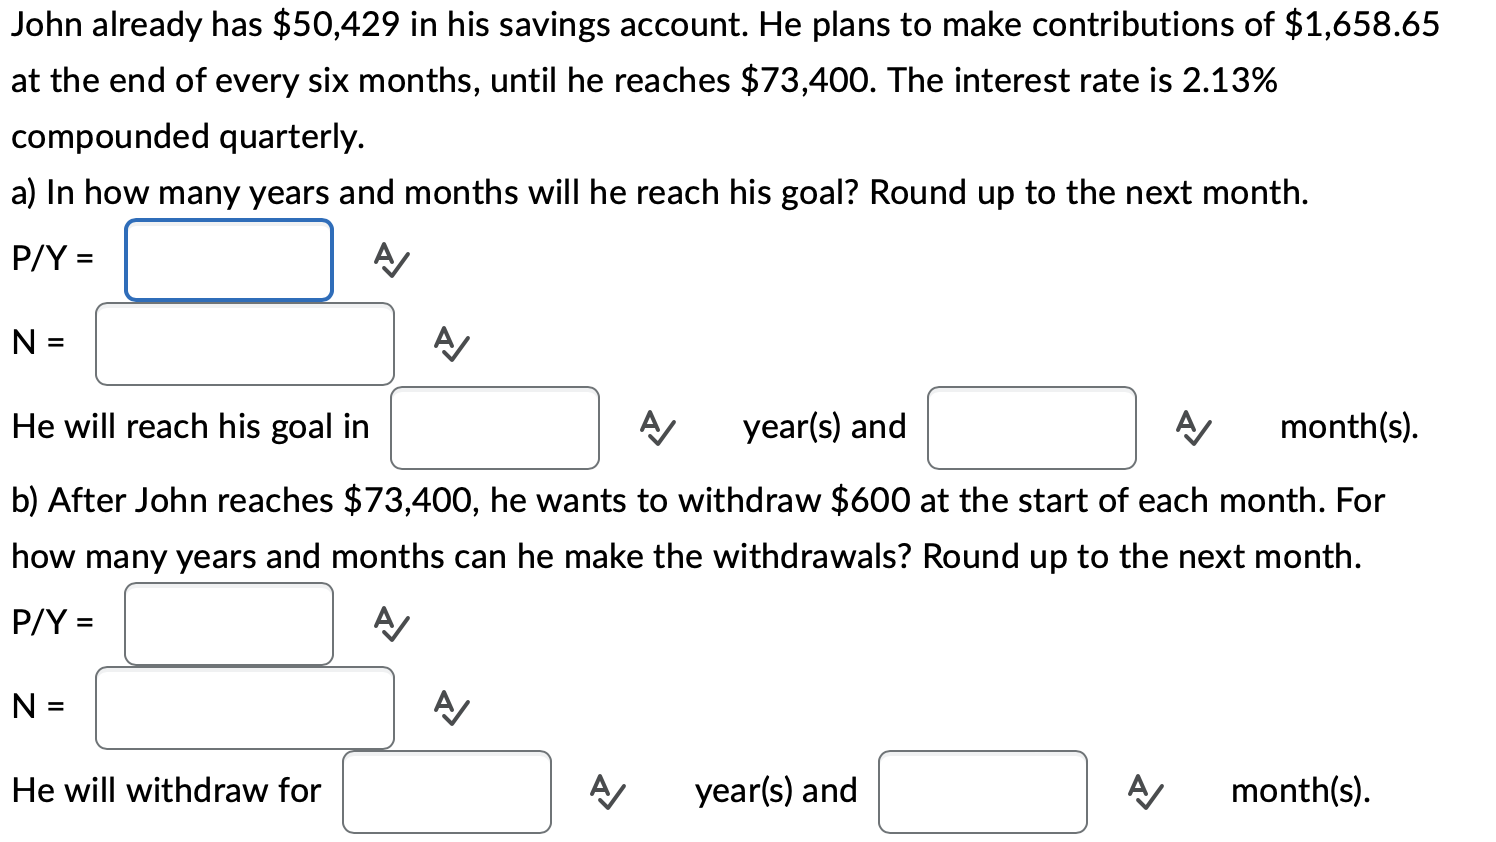 John already has $50,429 in his savings account. He plans to make contributions of $1,658.65 at the end of